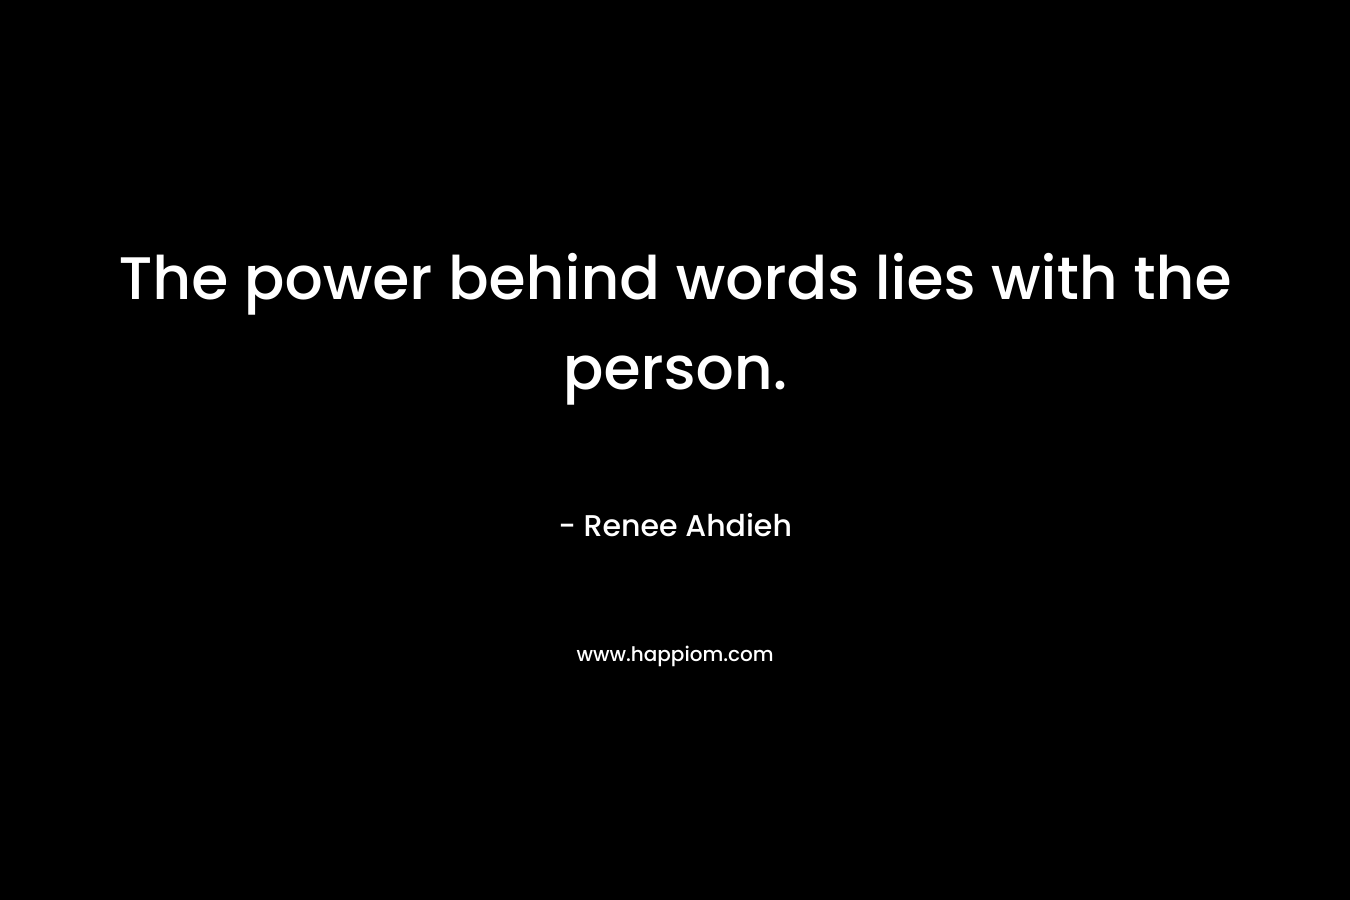 The power behind words lies with the person.